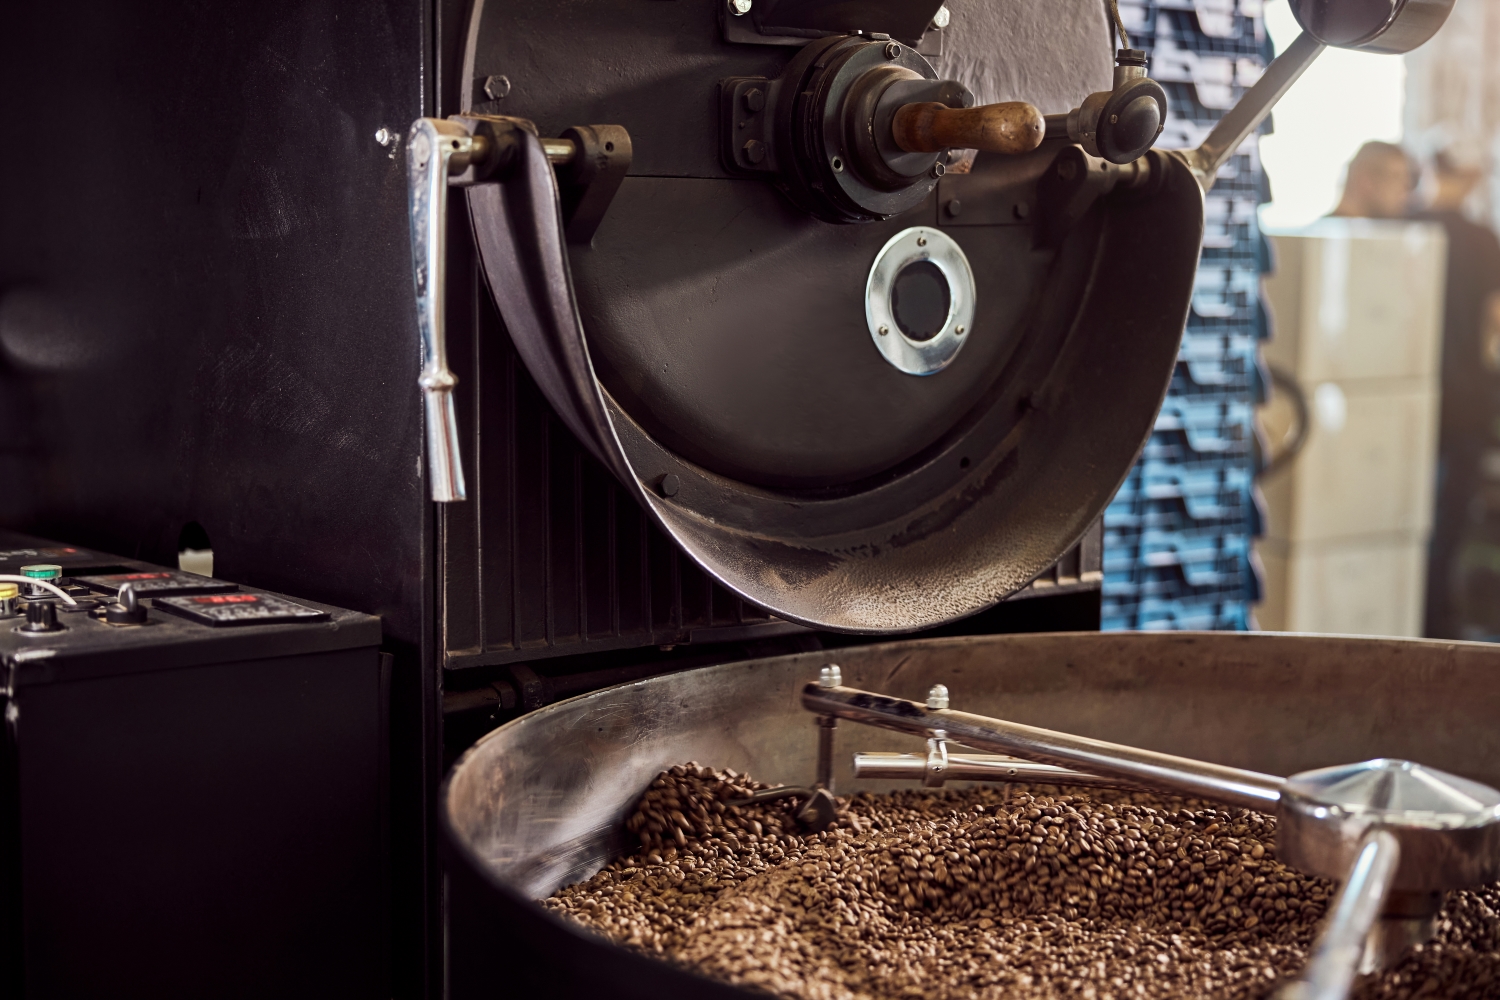 Industrial Coffee Machine with Coffee Beans